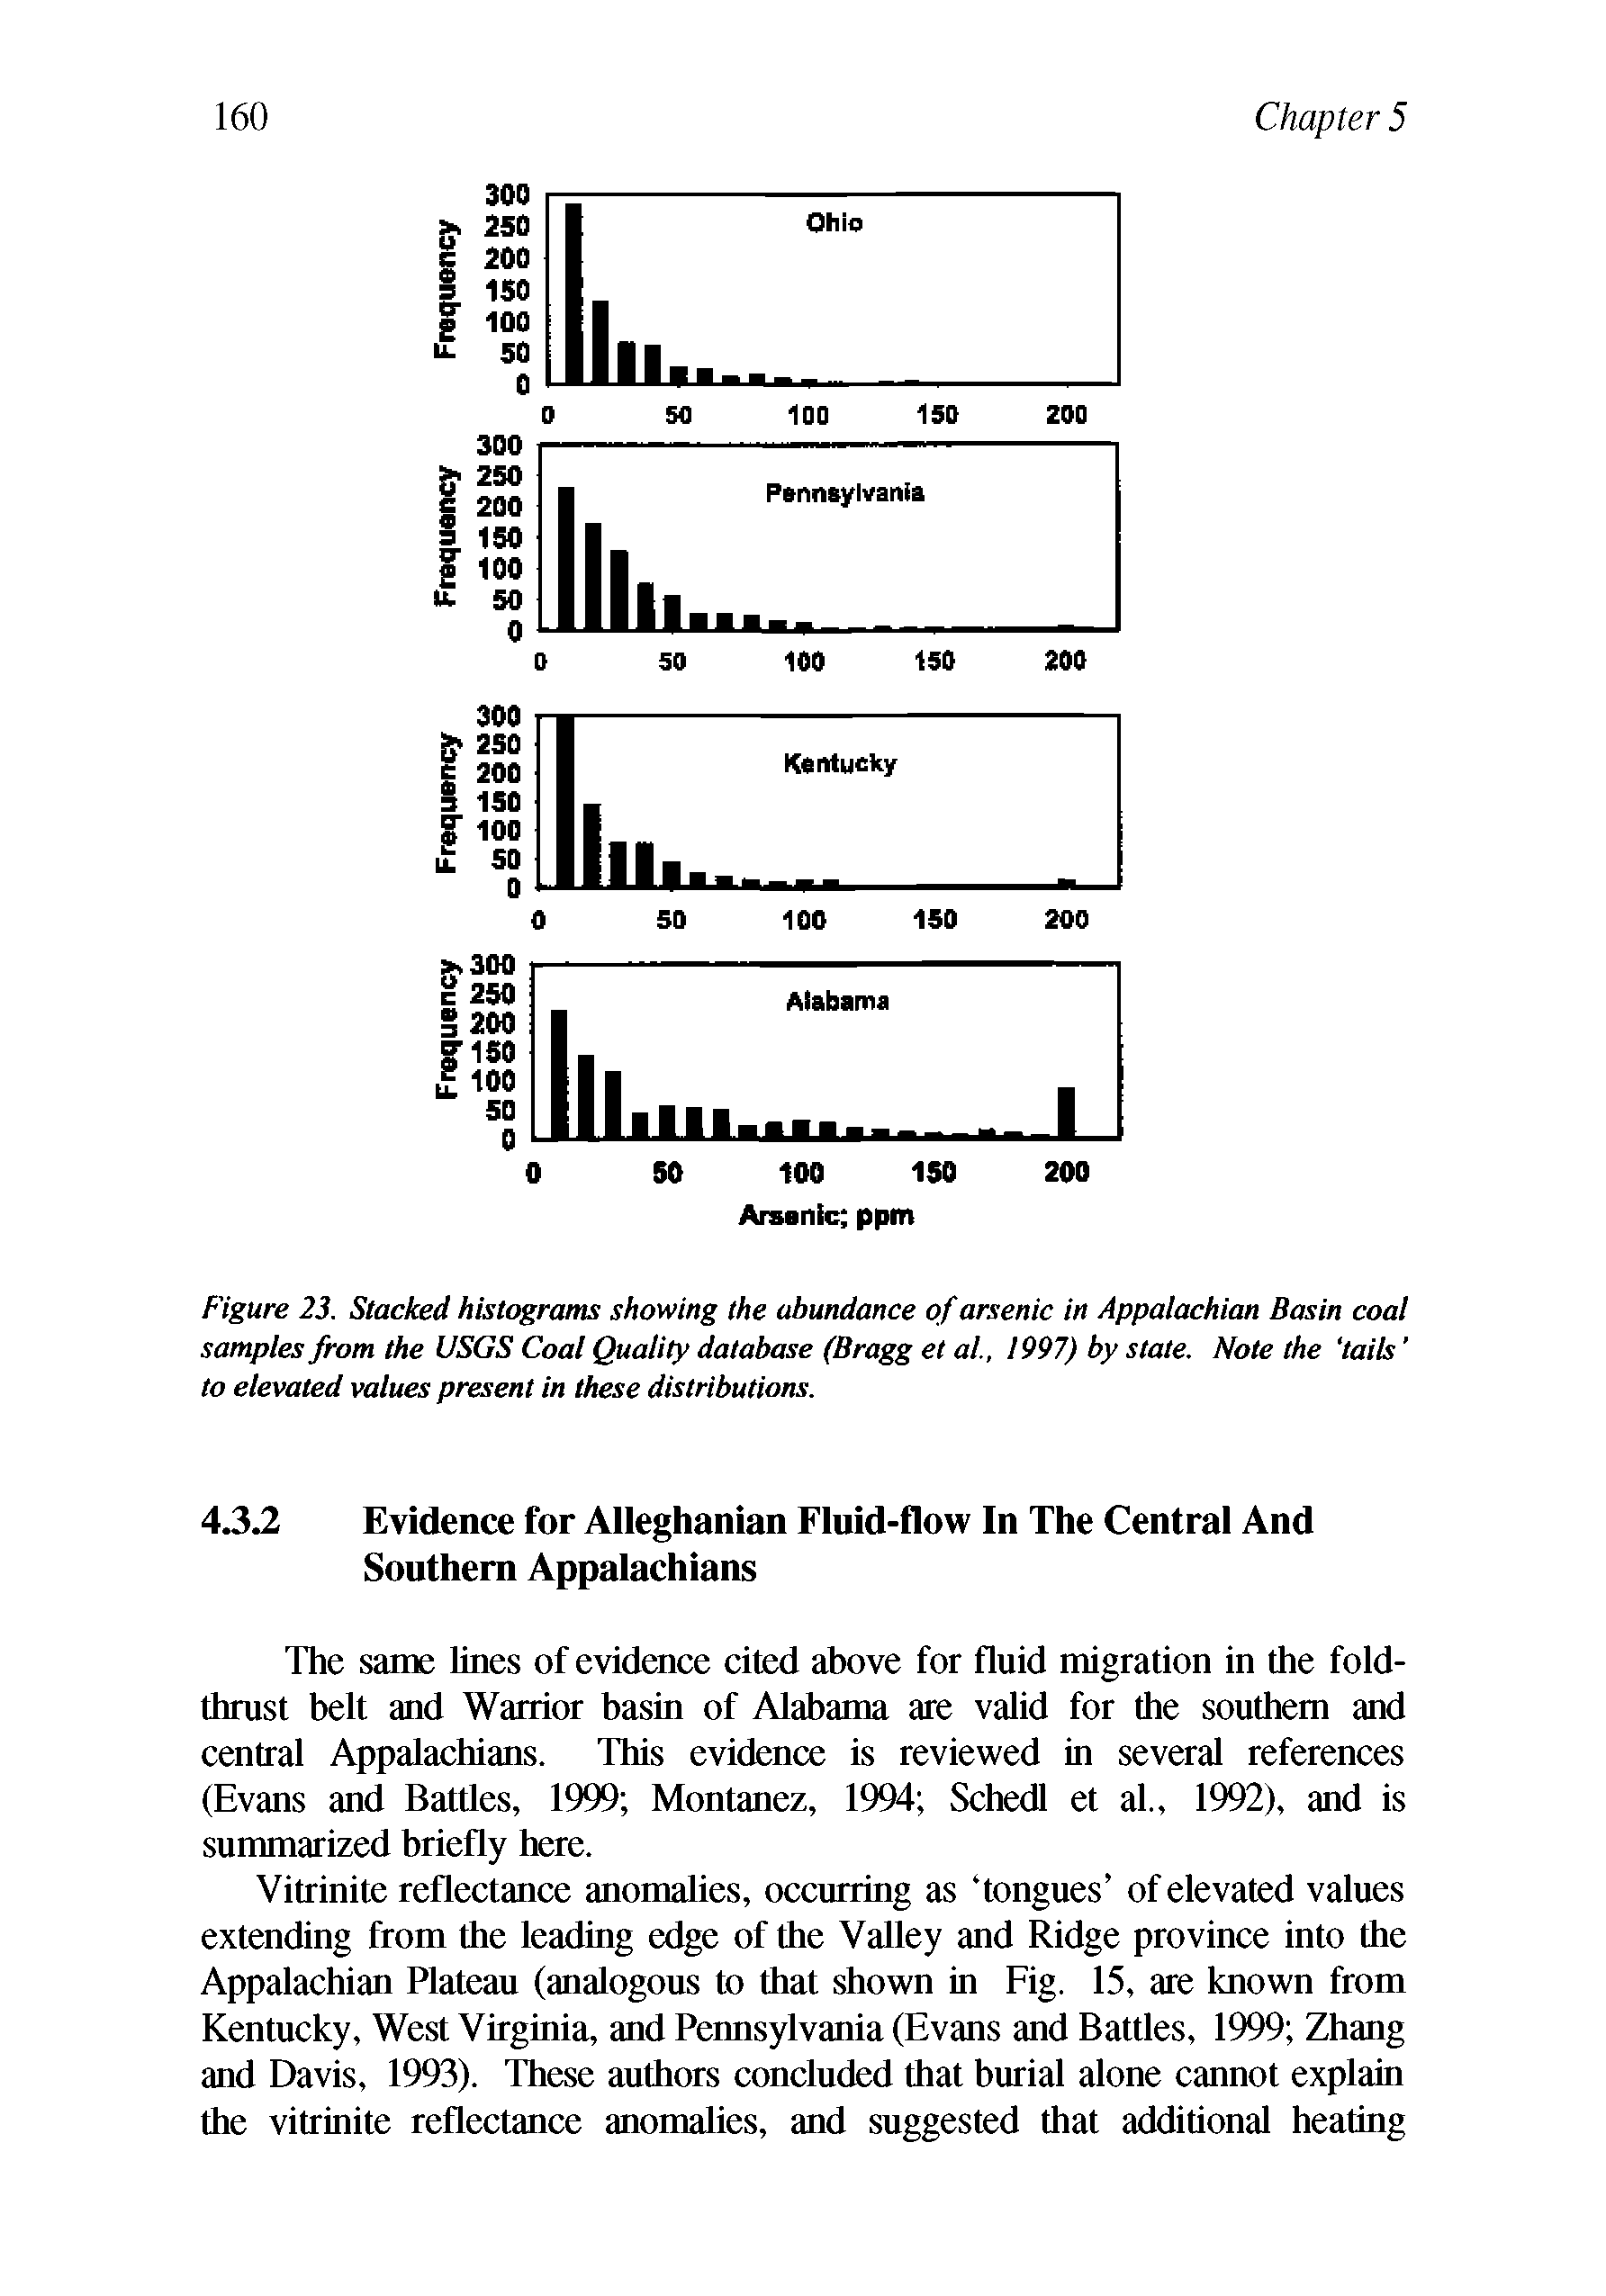 Figure 23. Stacked histograms showing the abundance of arsenic in Appalachian Basin coal samples from the USGS Coal Quality database (Bragg et al, 1997) by state. Note the tails to elevated values present in these distributions.